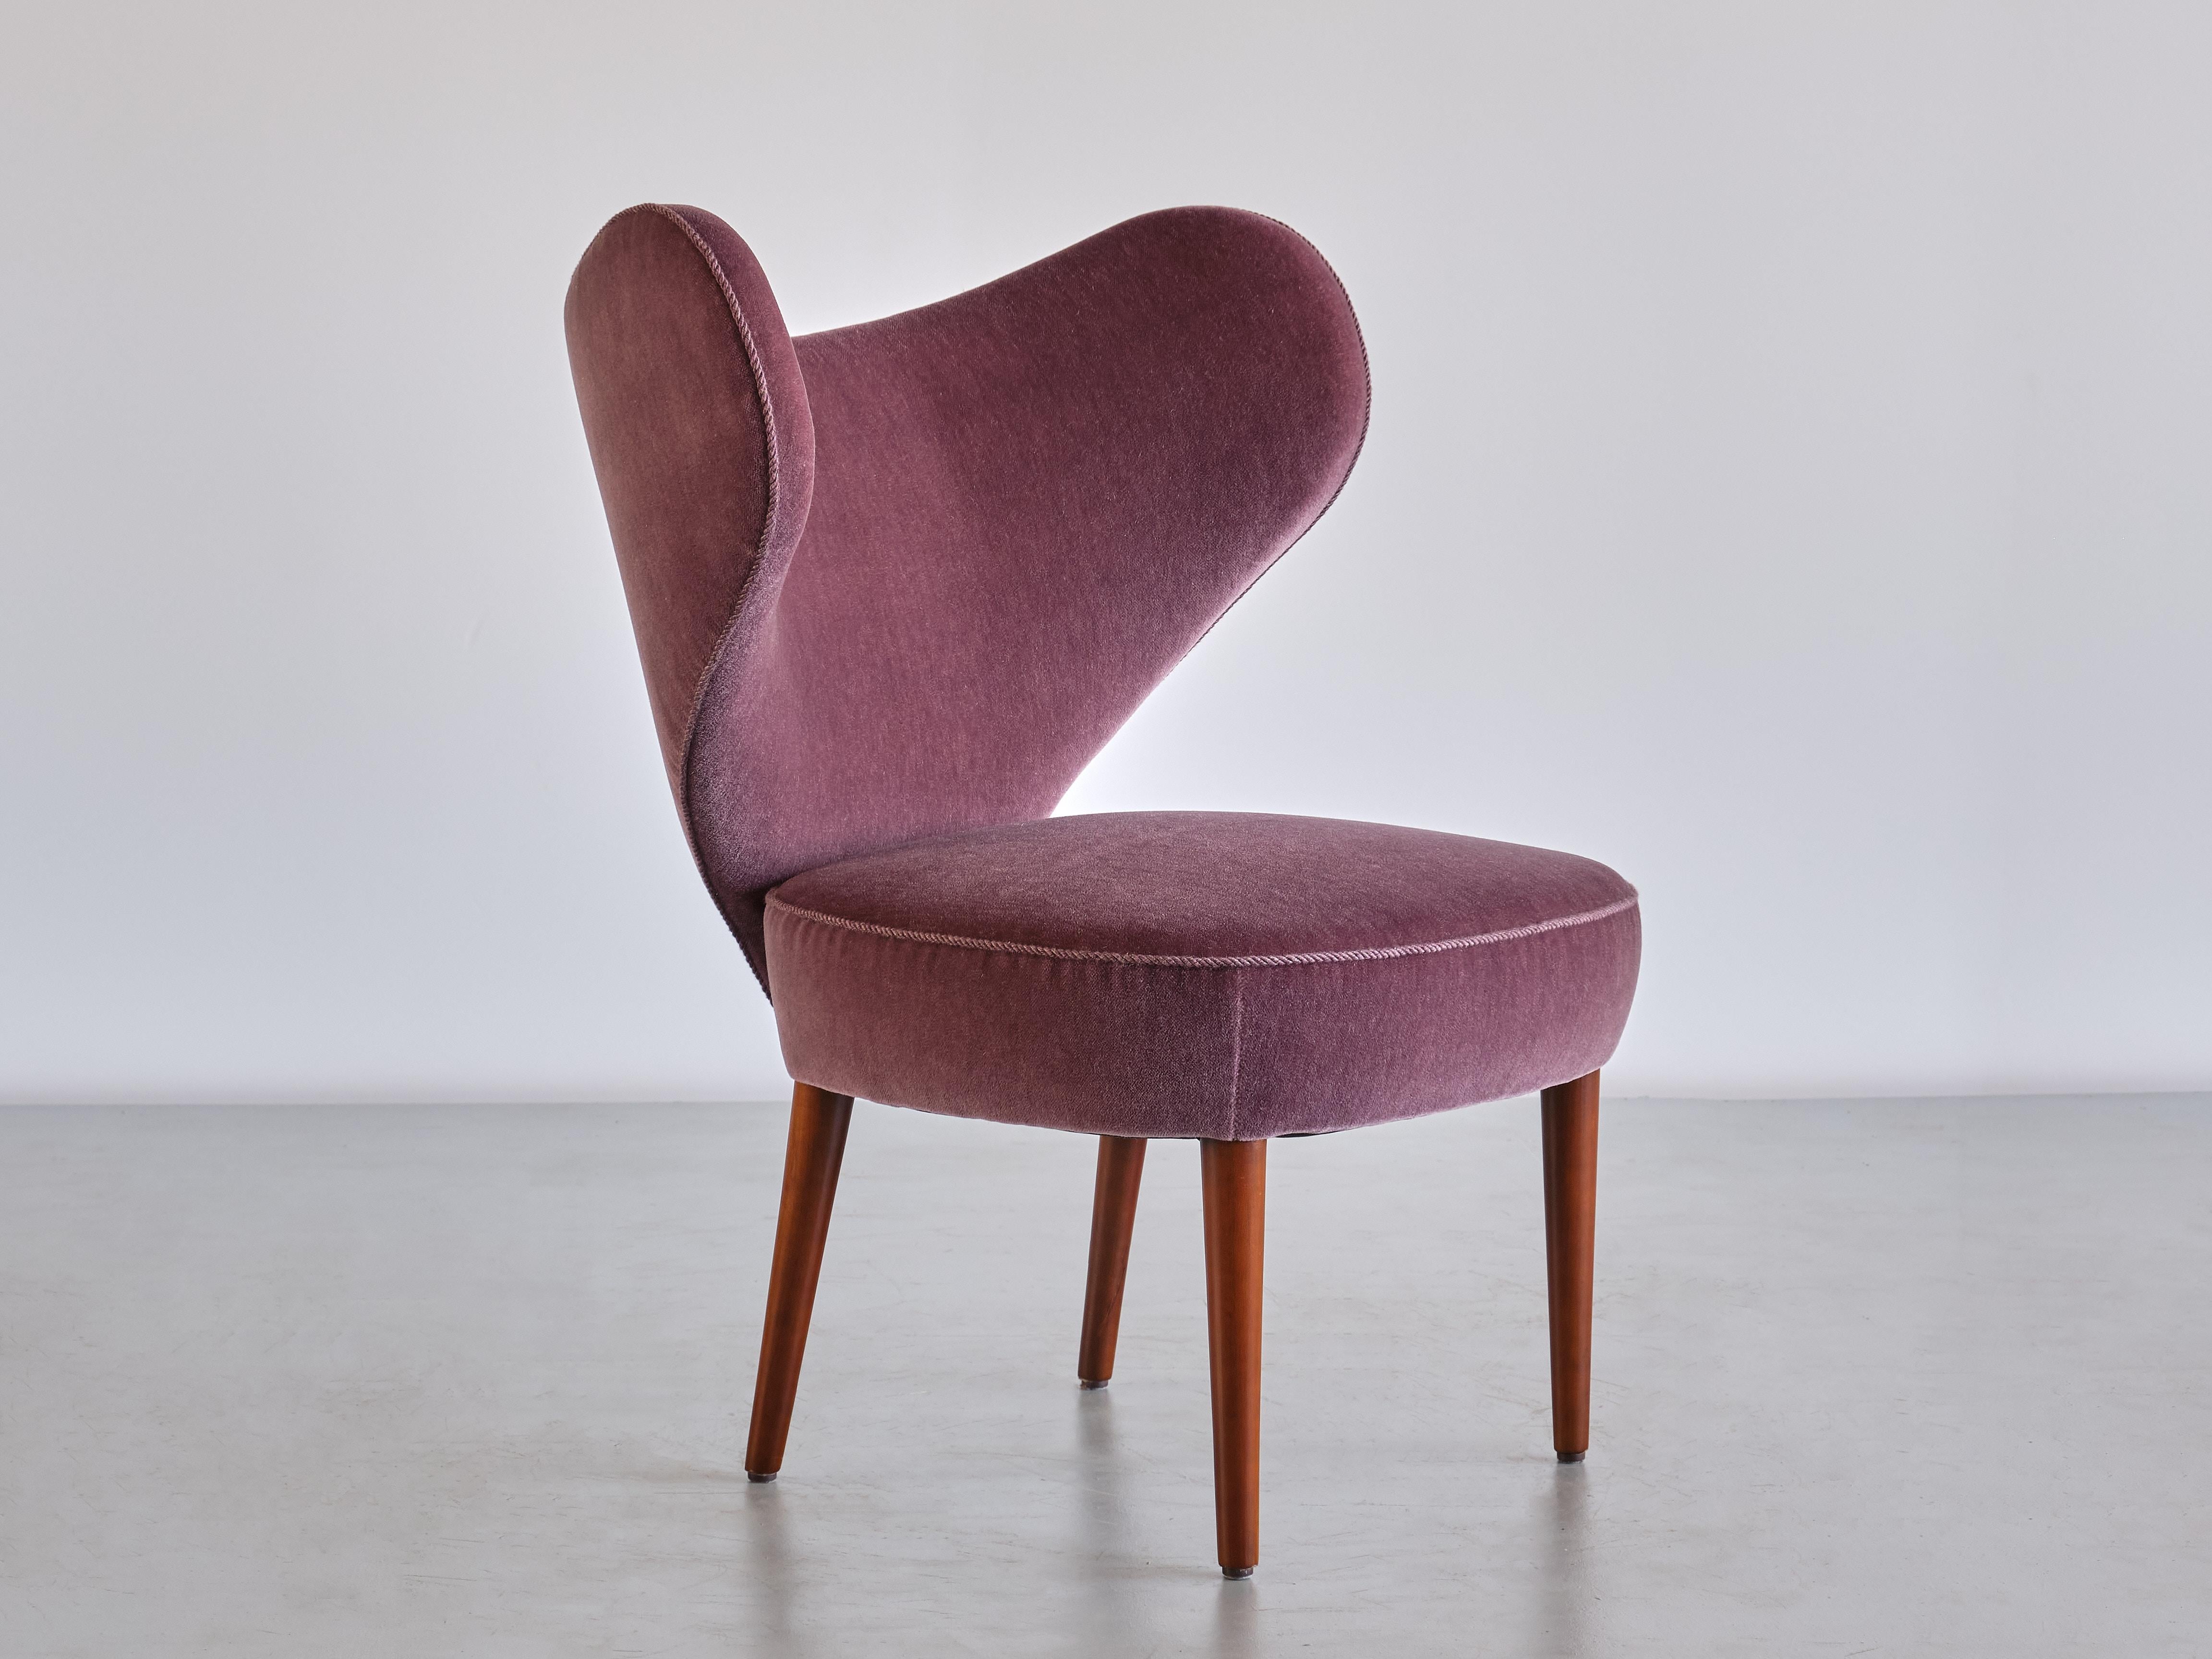 This exceptionally rare chair was produced by the Danish company Brøndbyøster Møbel & Trævarefabrik A/S in 1953. The model was aptly named 'Hjertestolen' which is Danish for 'Heart Chair'. 
The exuberant design is marked by the heart shaped back and